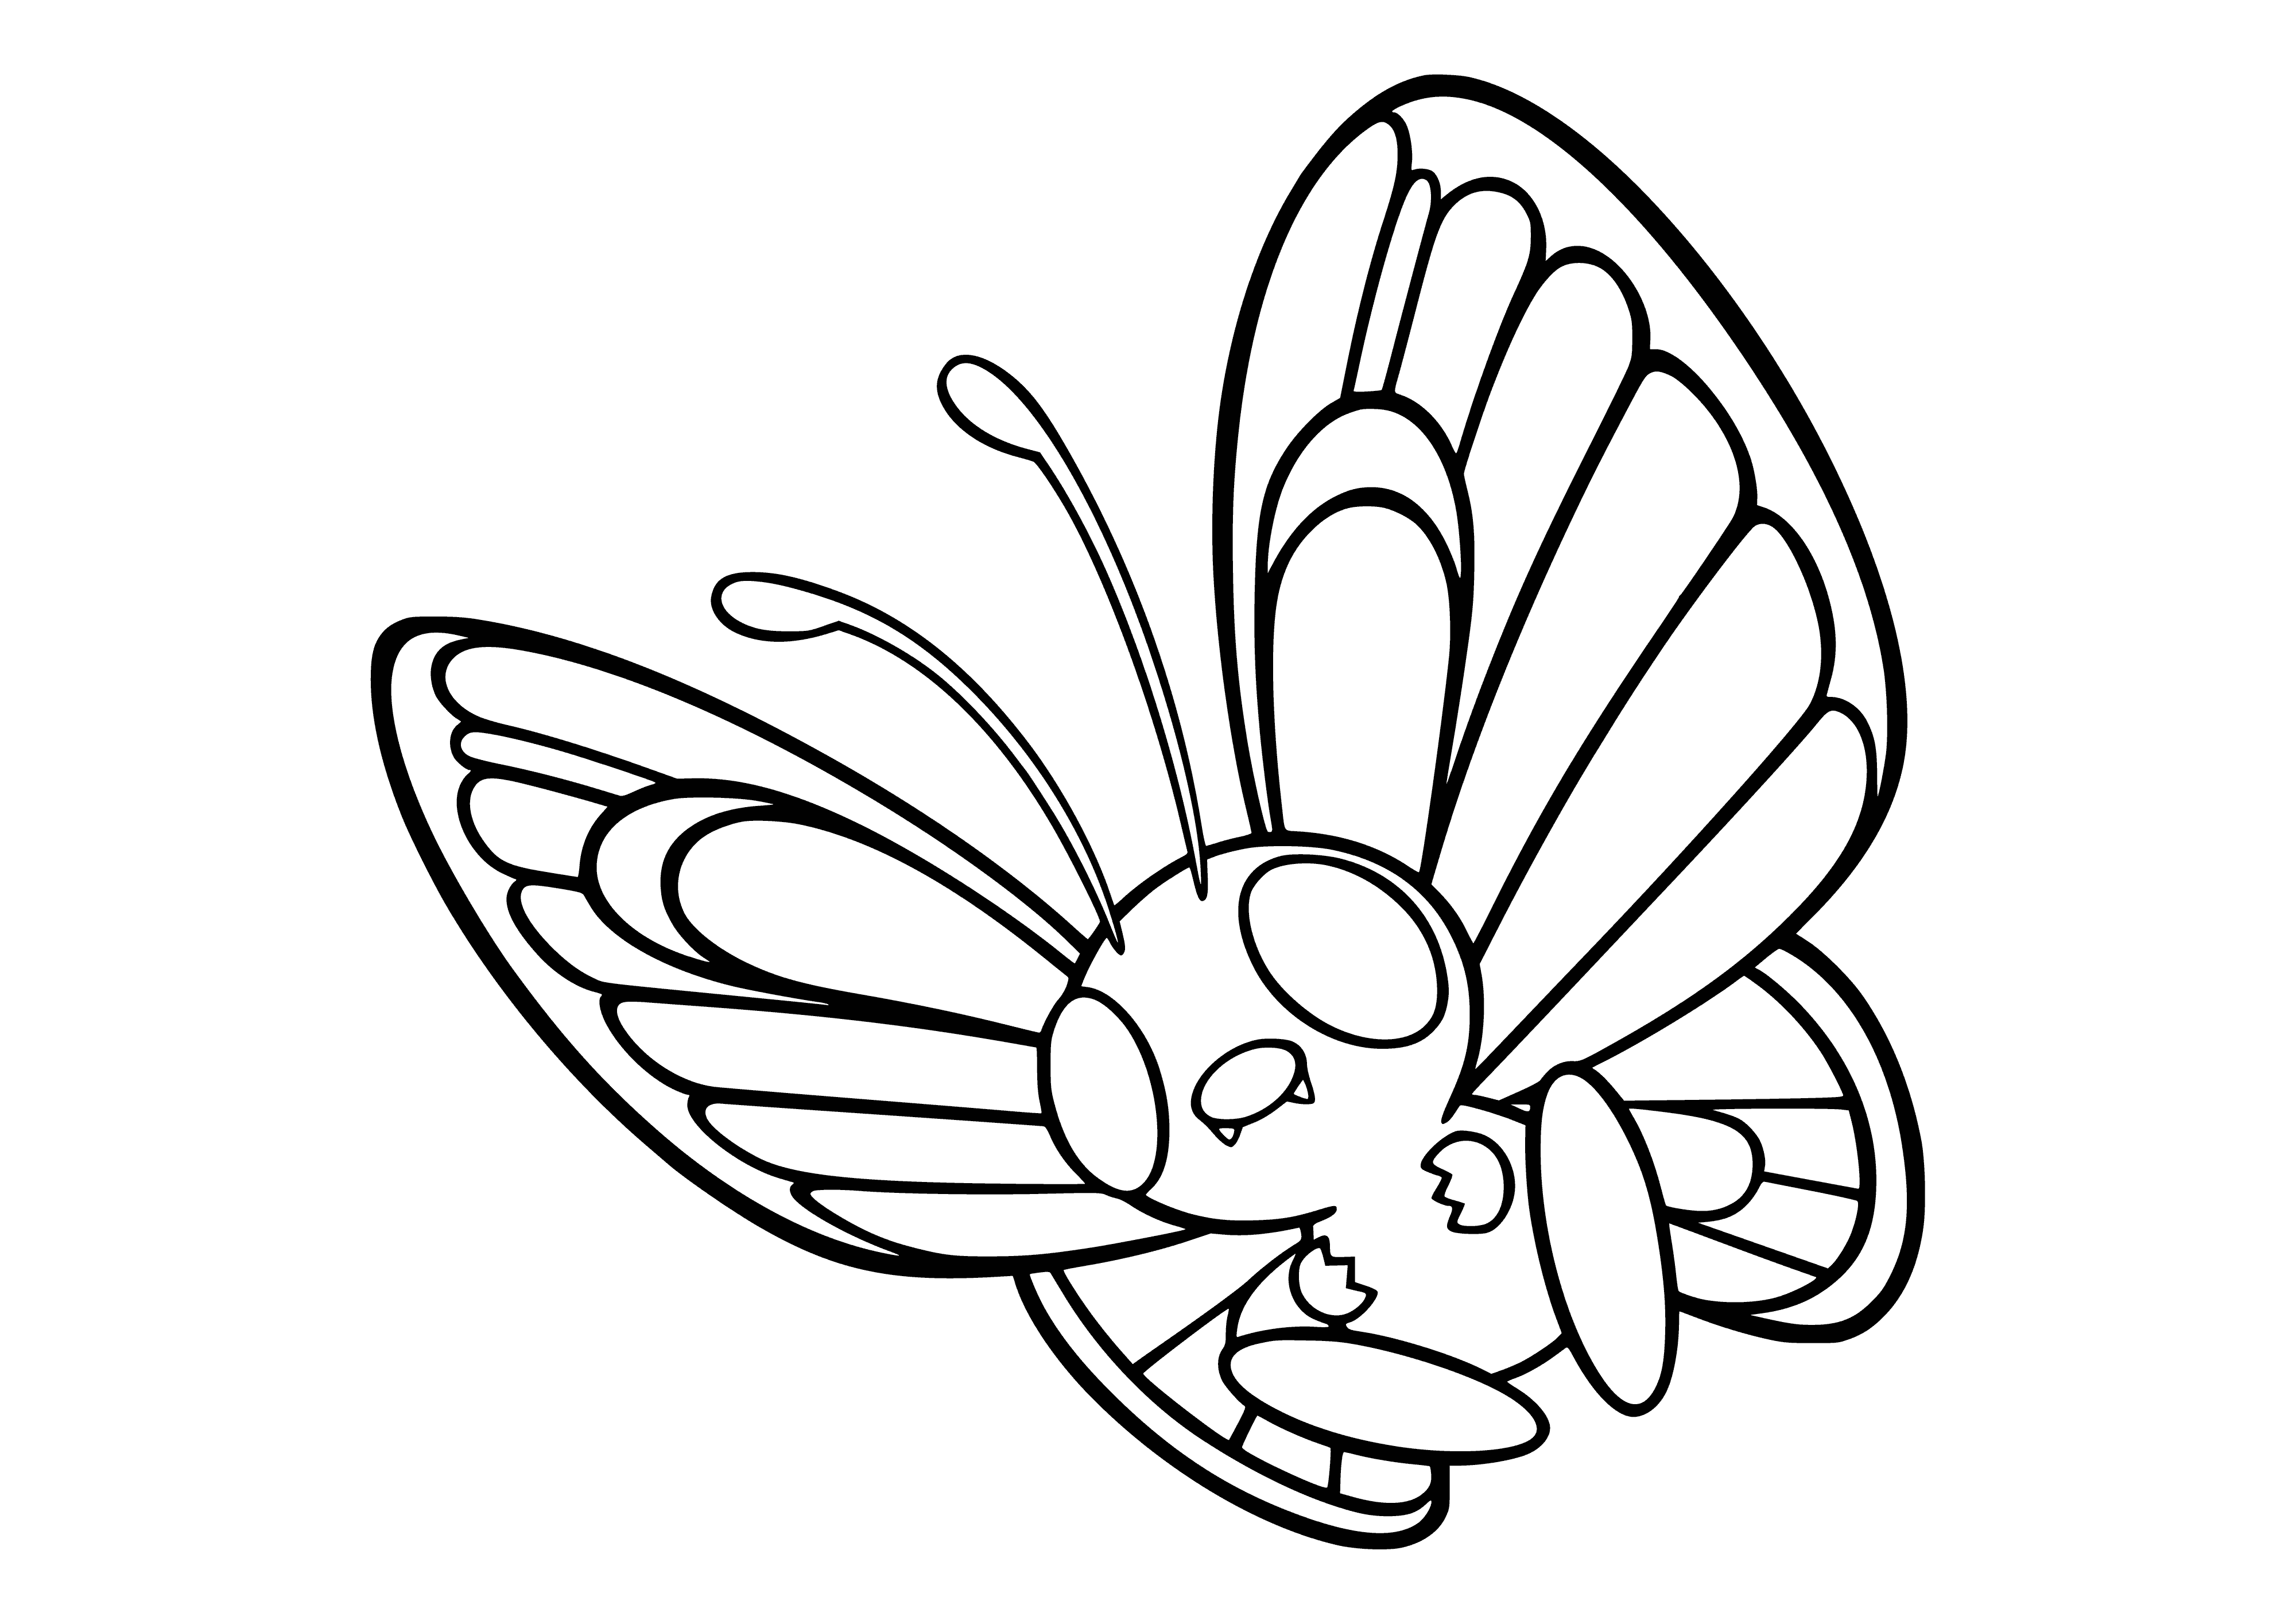 coloring page: Large blue Pokémon w/ two pairs of white wings, black spots, yellow head & black stripes on abdomen. Small black eyes & two white fangs.